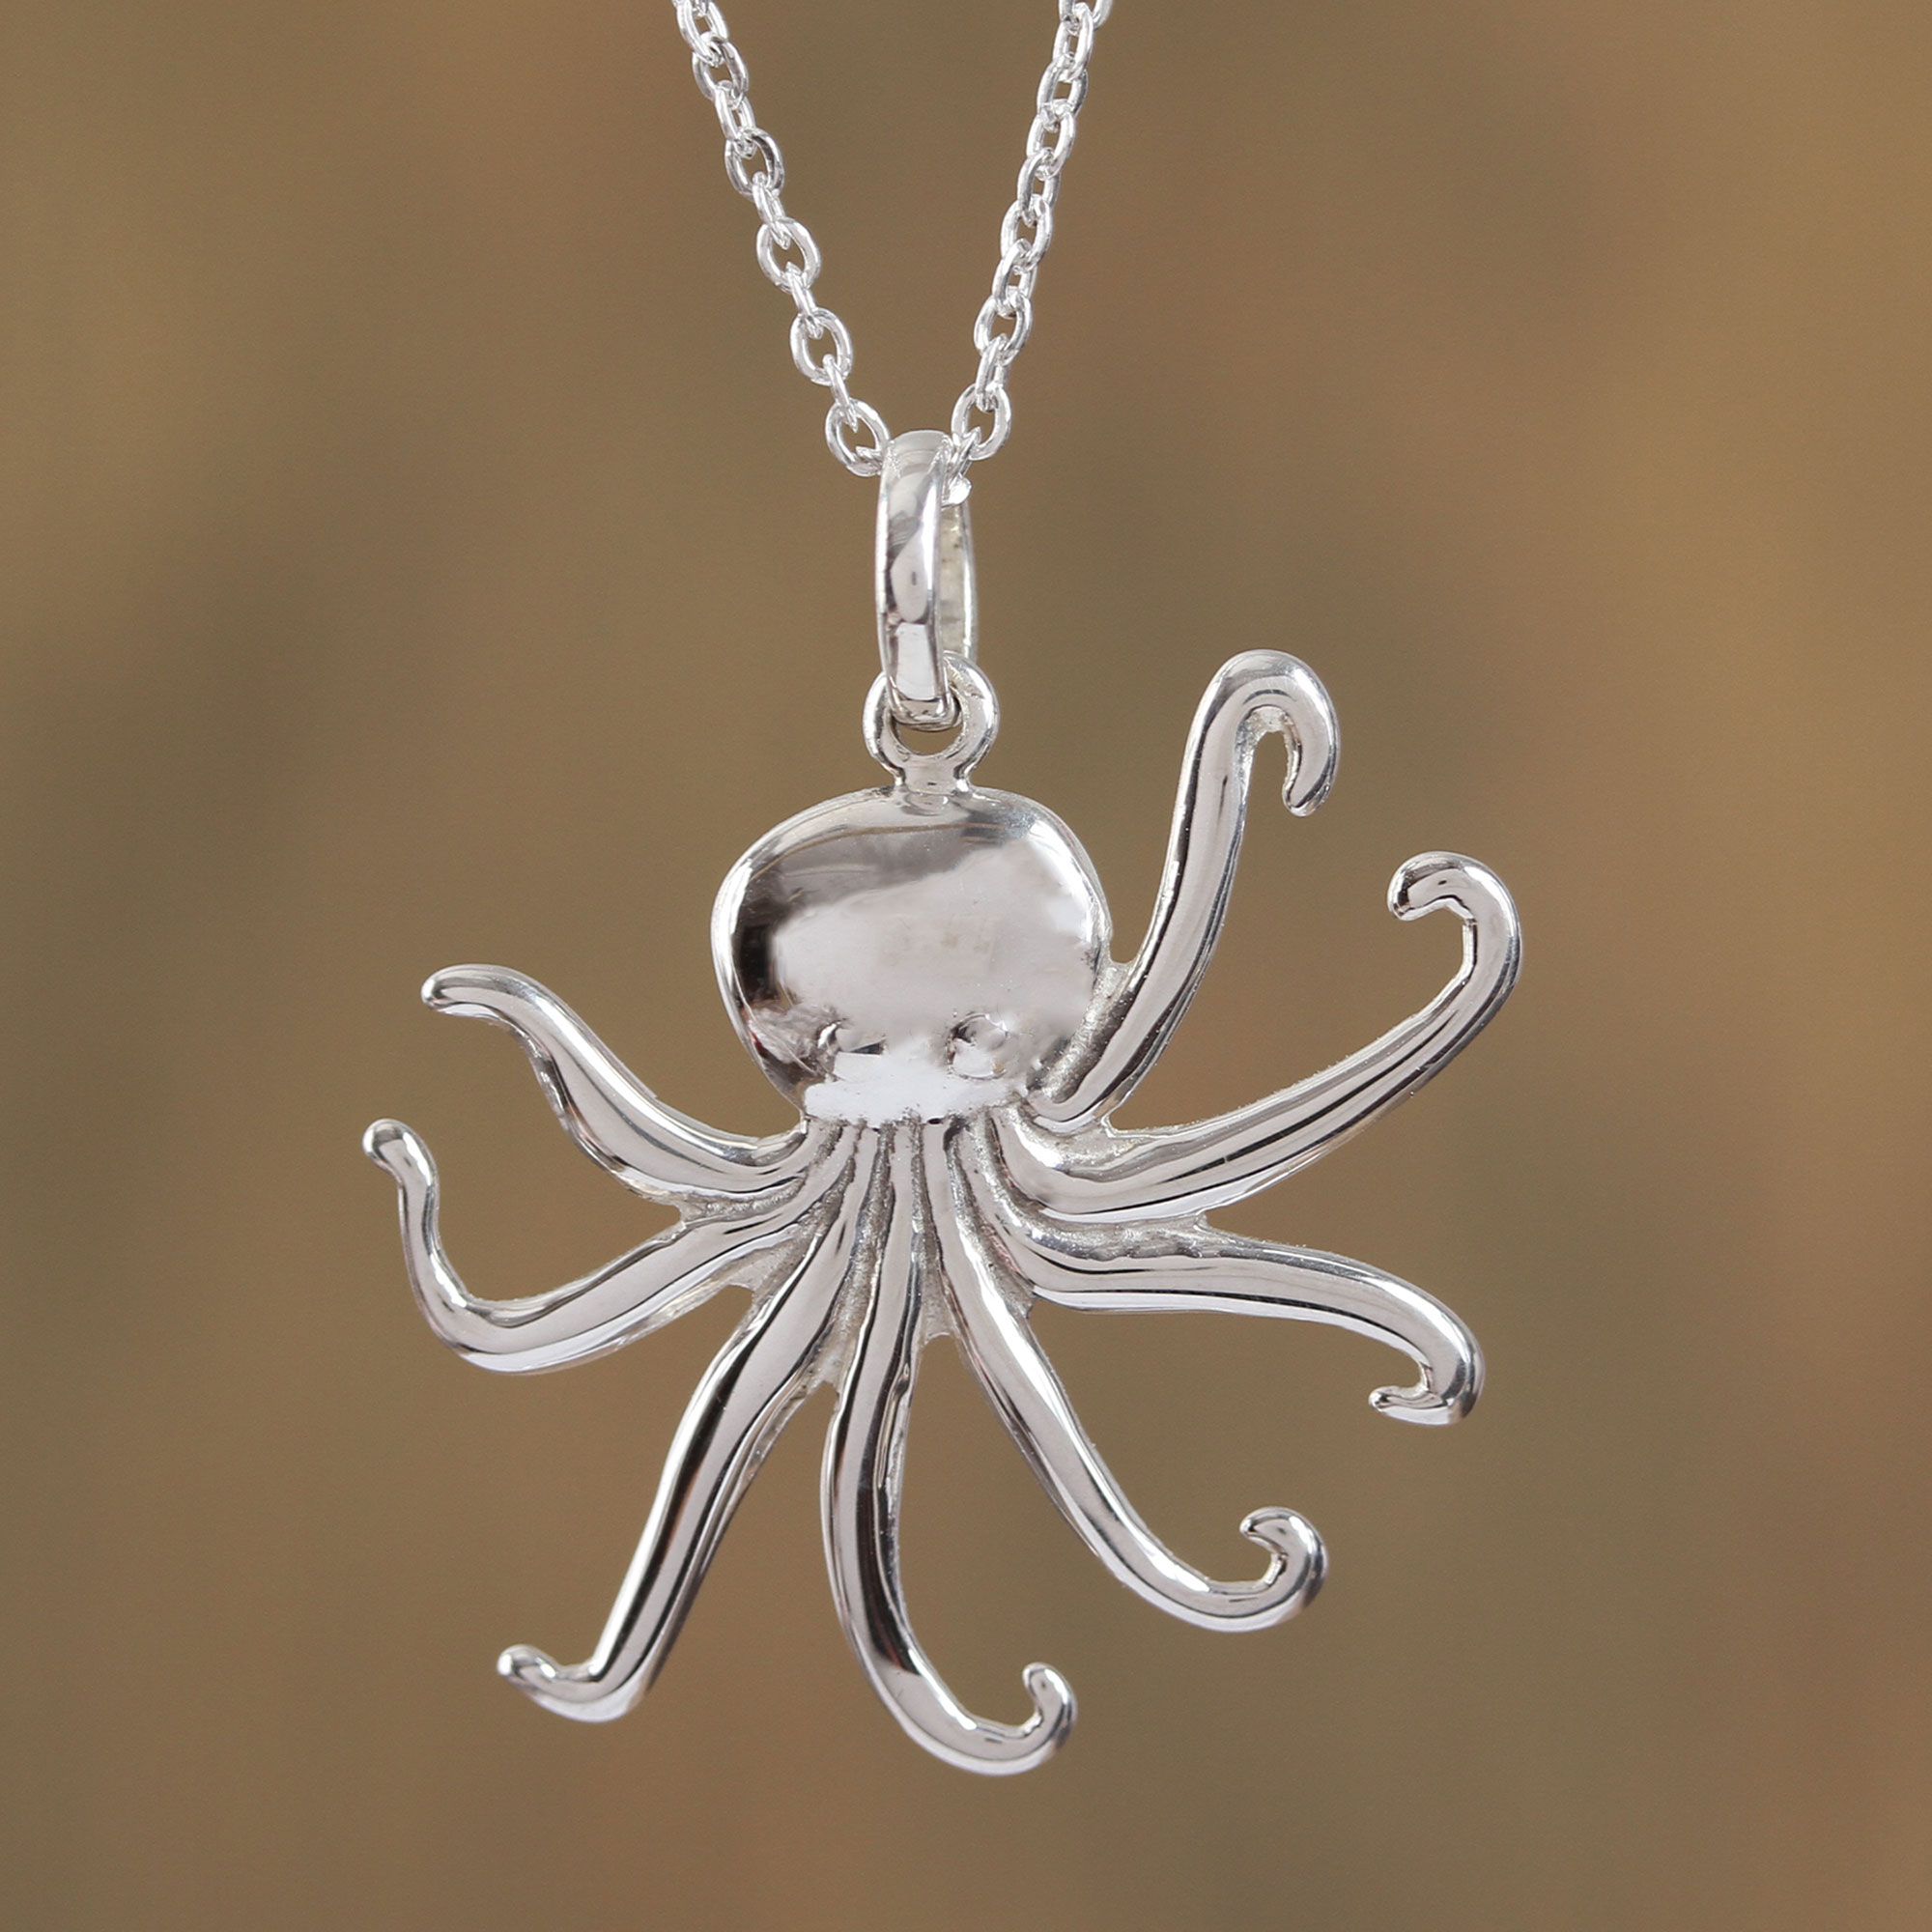 Beautiful Sterling Silver OCTOPUS charm charms